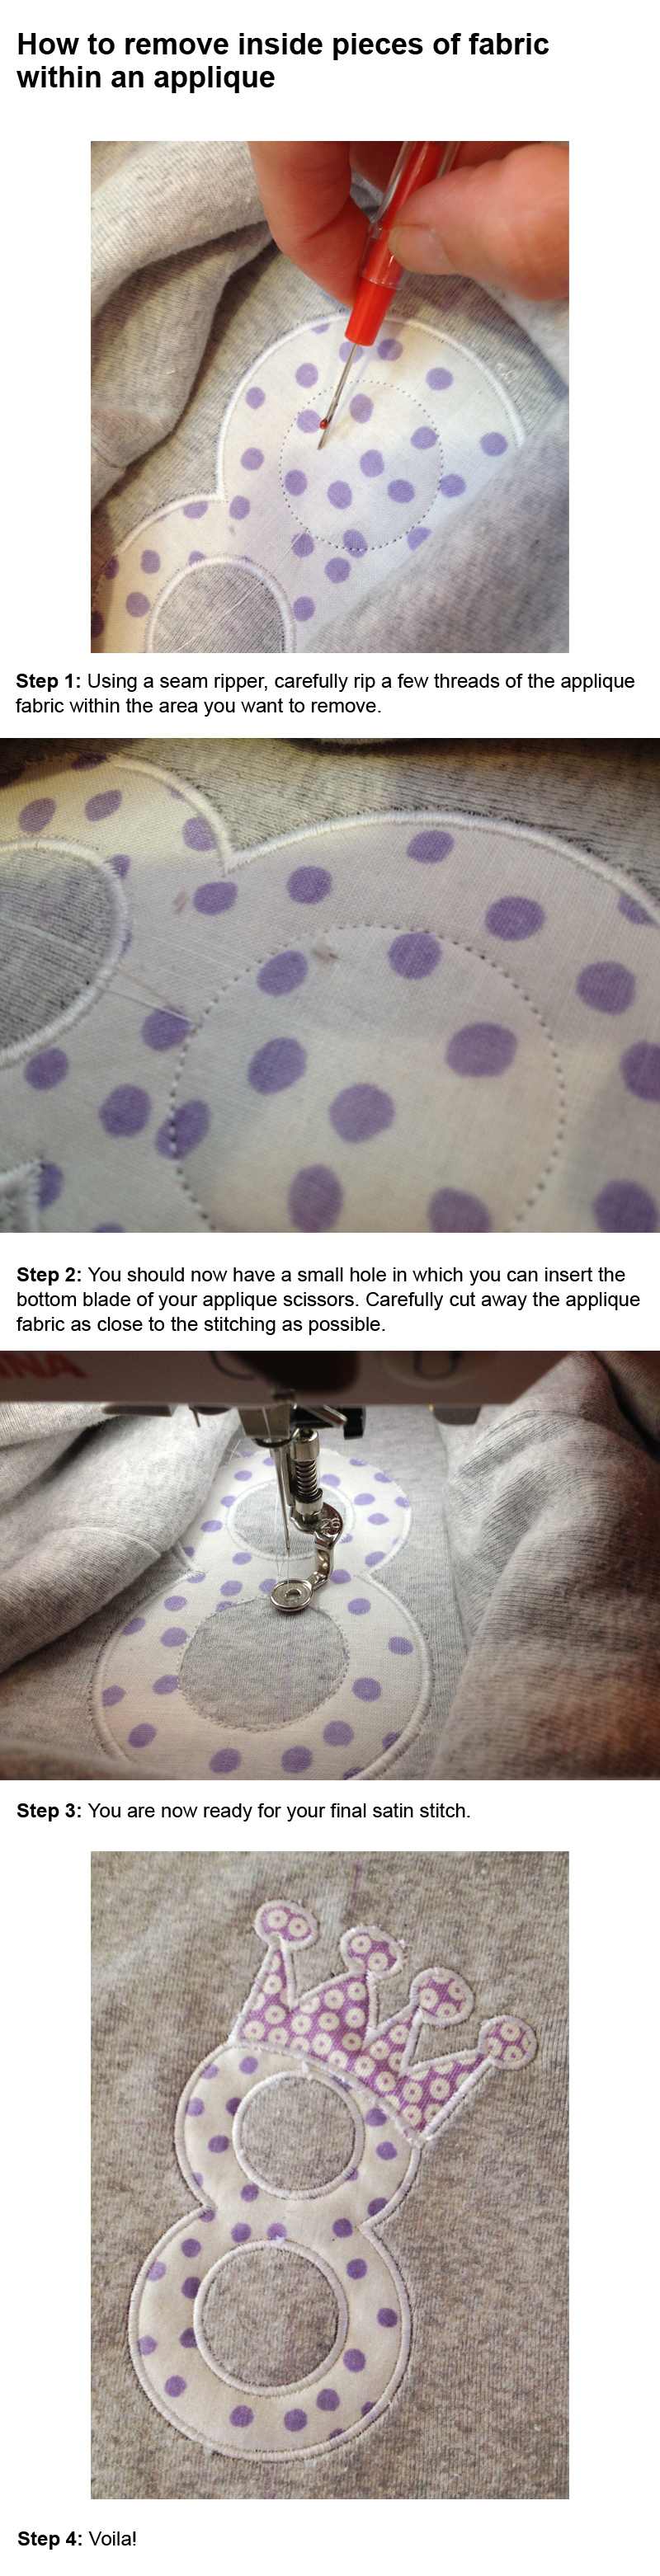 how to remove applique fabric in an enclose shape